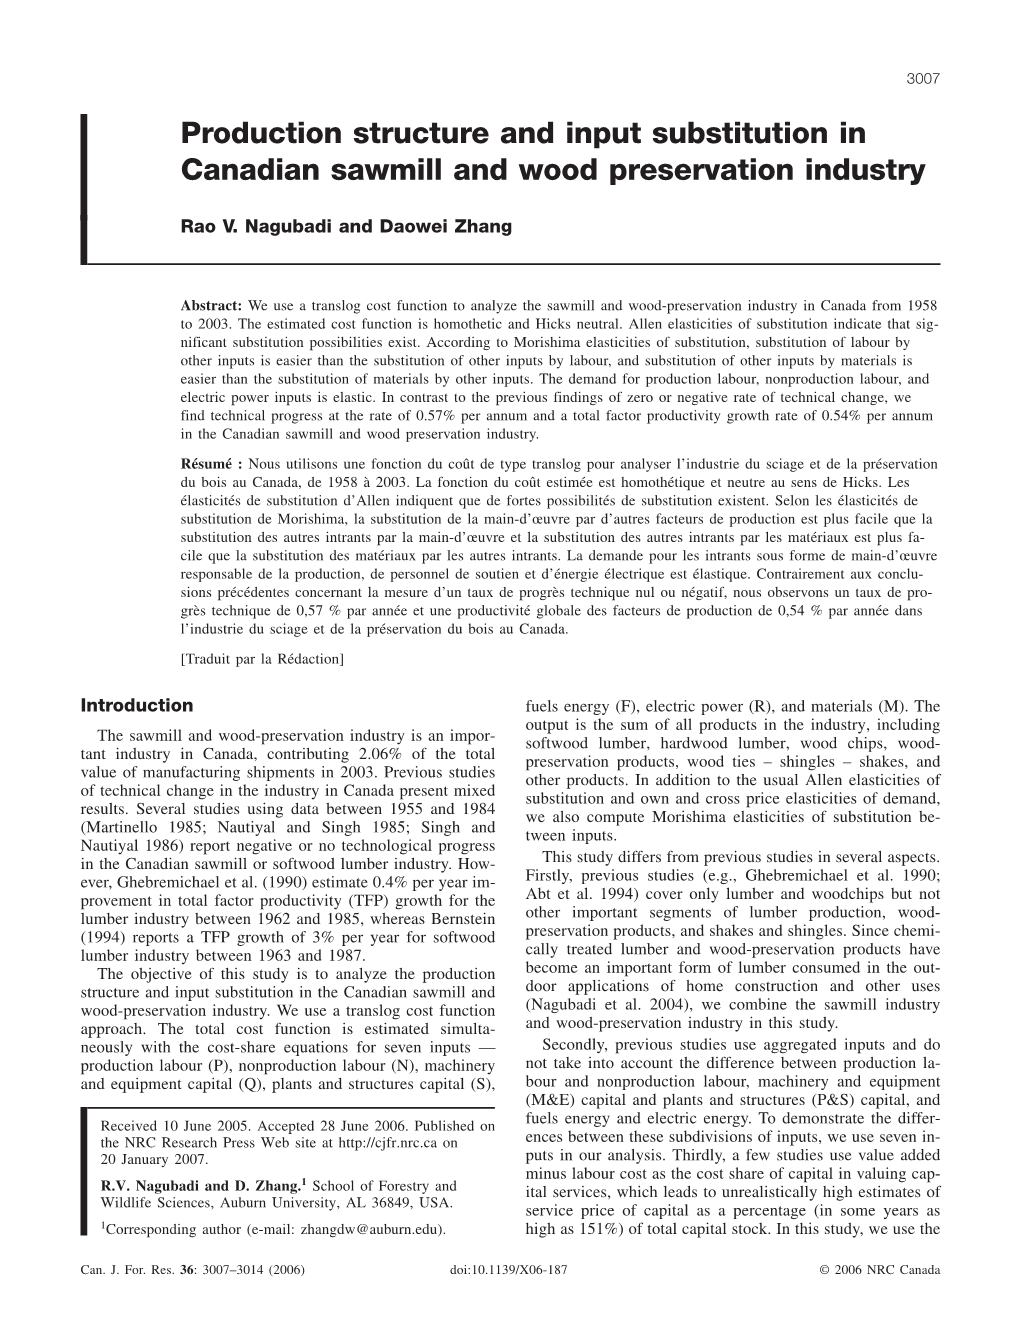 Production Structure and Input Substitution in Canadian Sawmill and Wood Preservation Industry